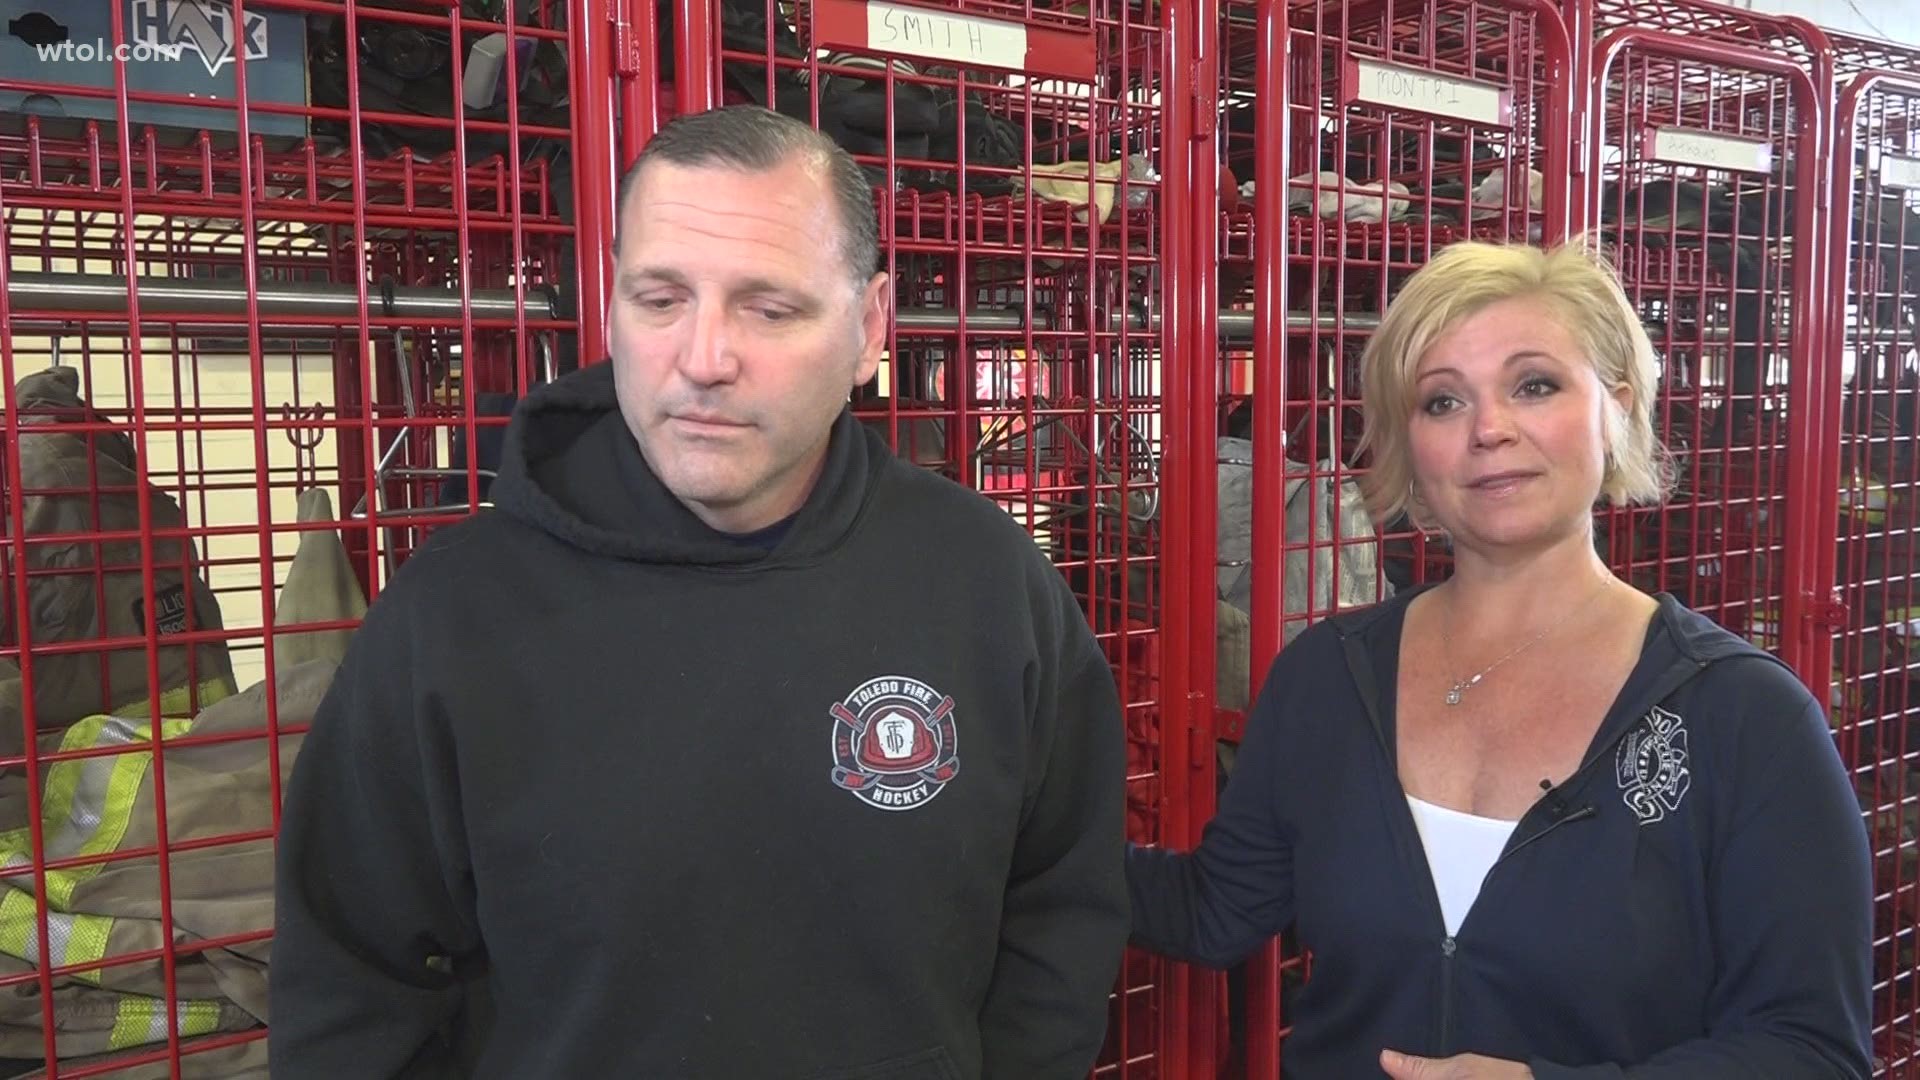 After a combined total of almost 40 years of experience, two lieutenants - husband and wife -  are retiring from the Toledo Fire Department.